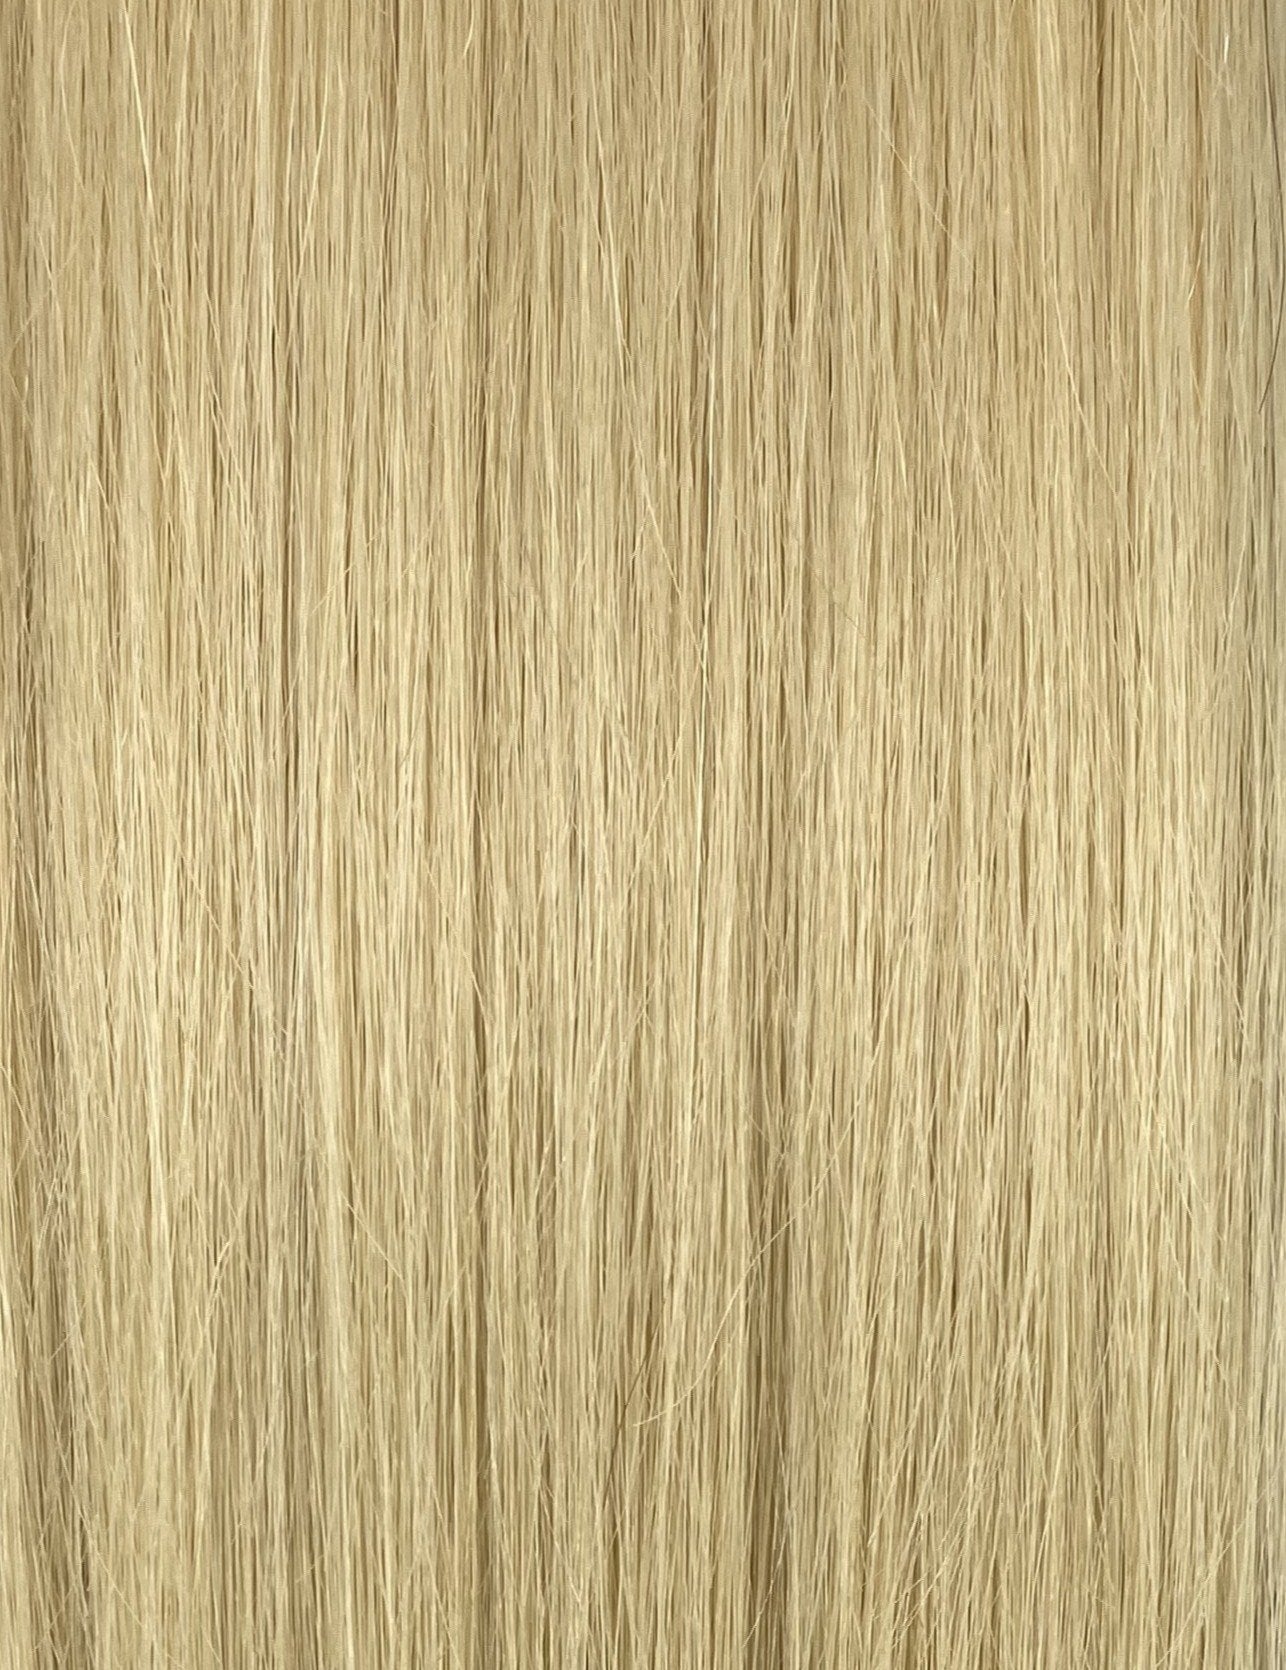 Weft hair extensions  #1004 - Double - 24 inches - Ultra Light Platinum Weft Longee Hair Thomas    